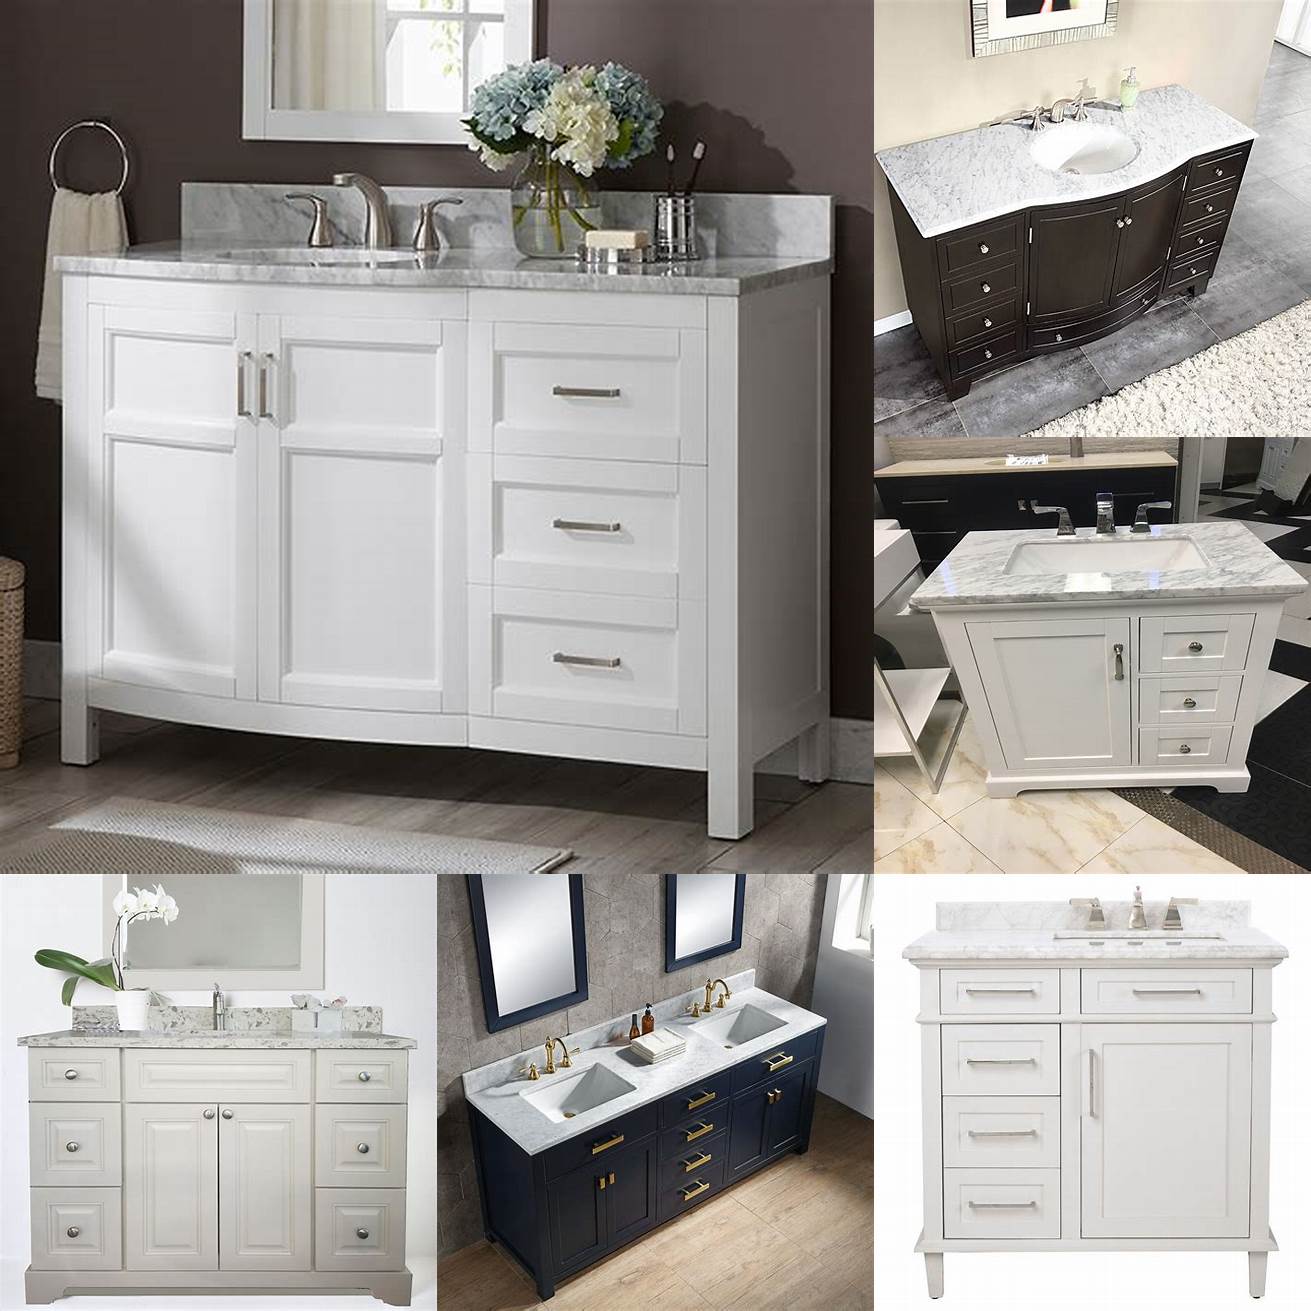 Image A vanity with drawers and marble countertop